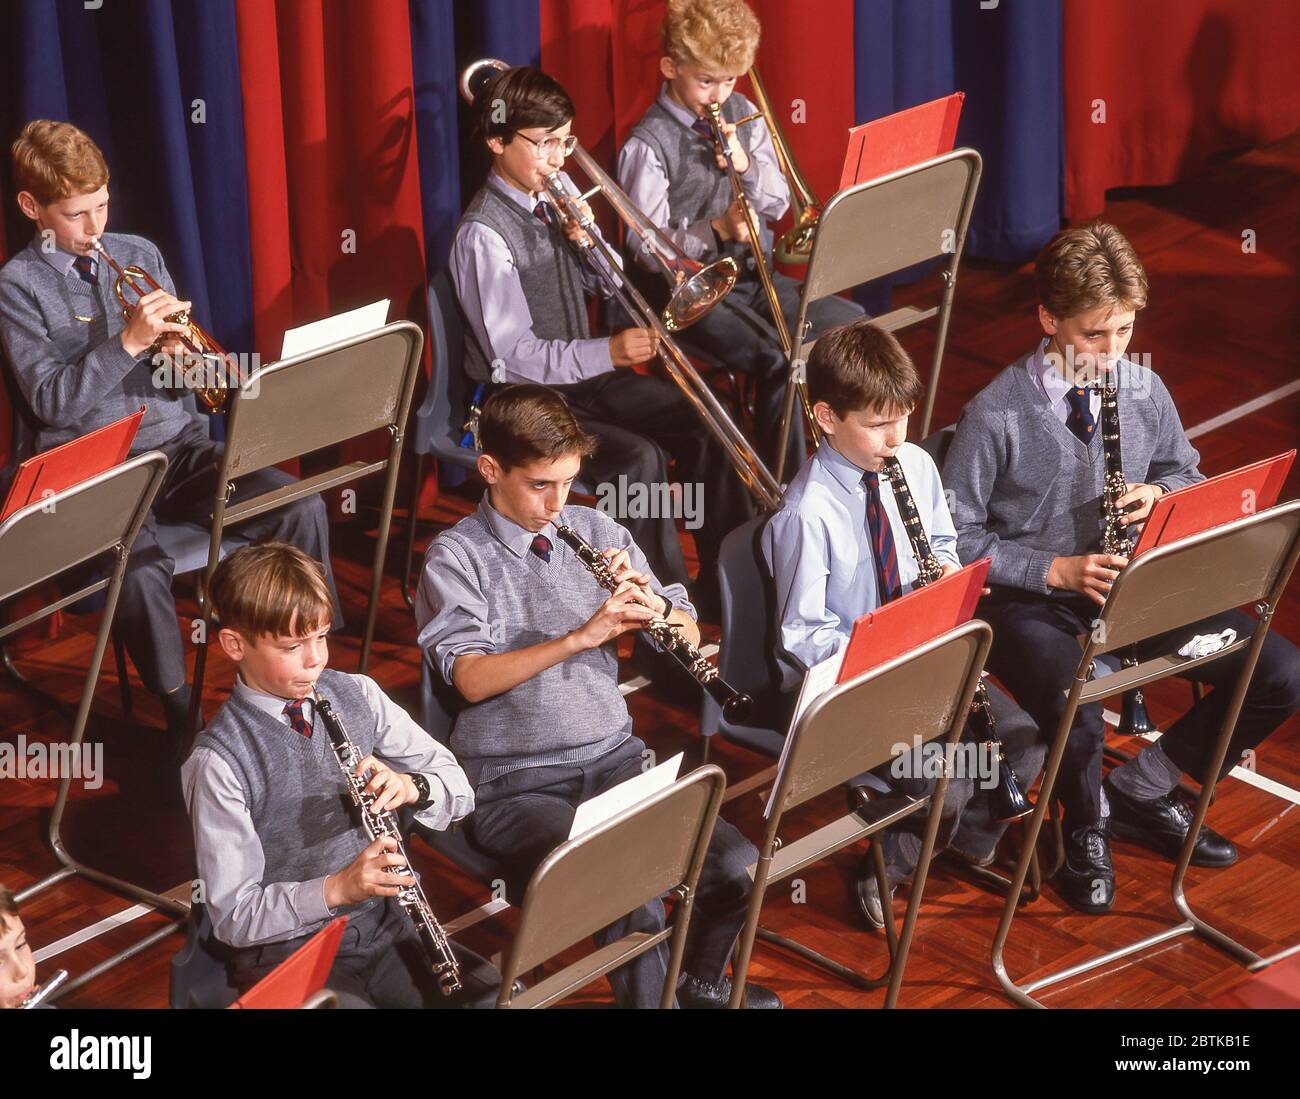 Boys playing trumpets and flutes in school orchestra, Surrey, England, United Kingdom Stock Photo